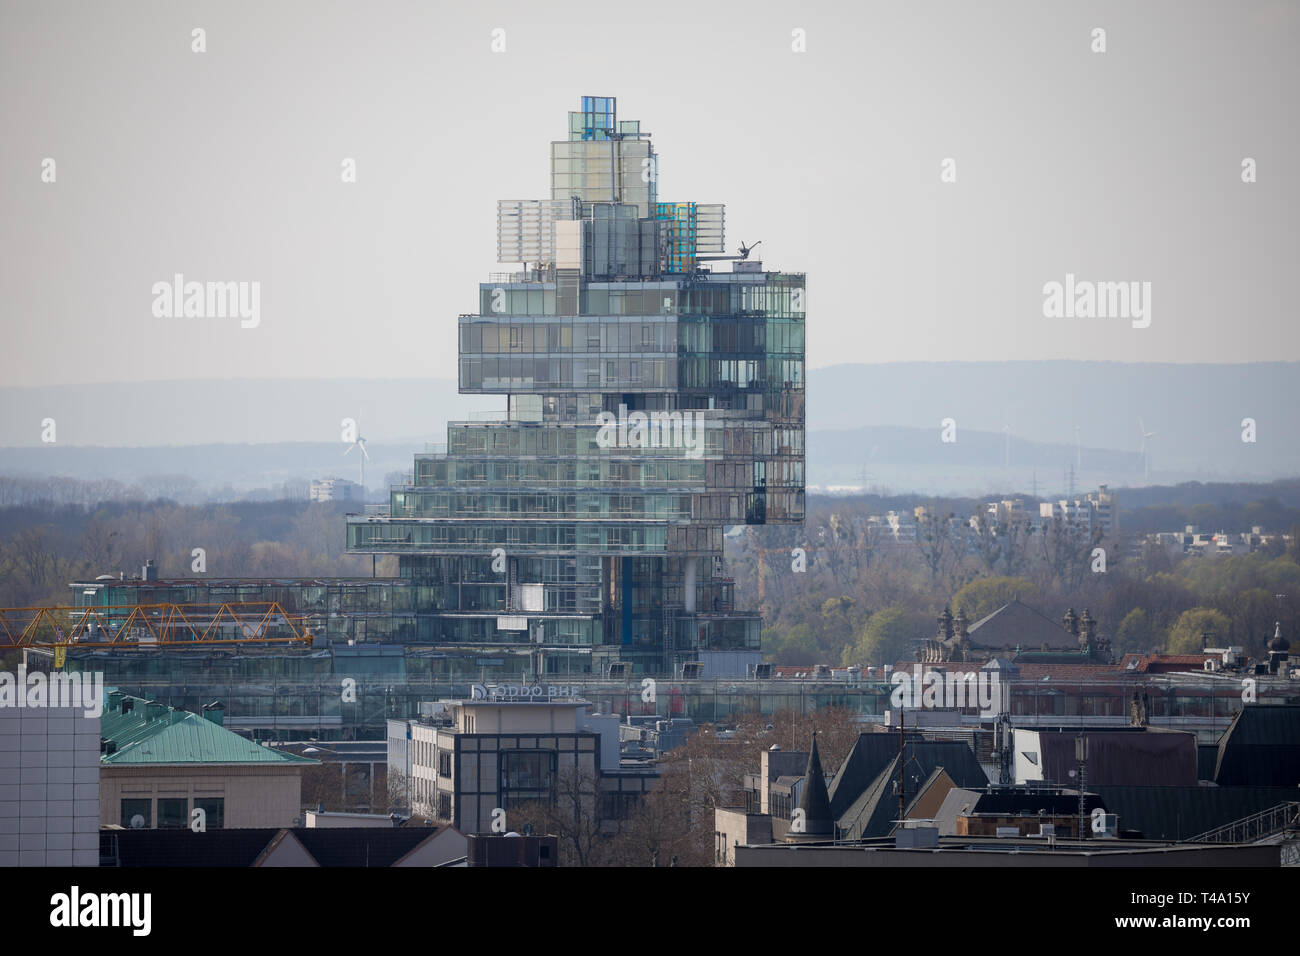 Hannover, Germany. 11th Apr, 2019. The administration building of Norddeutsche Landesbank NordLB can be seen on the horizon. Credit: Moritz Frankenberg/dpa/Alamy Live News Stock Photo